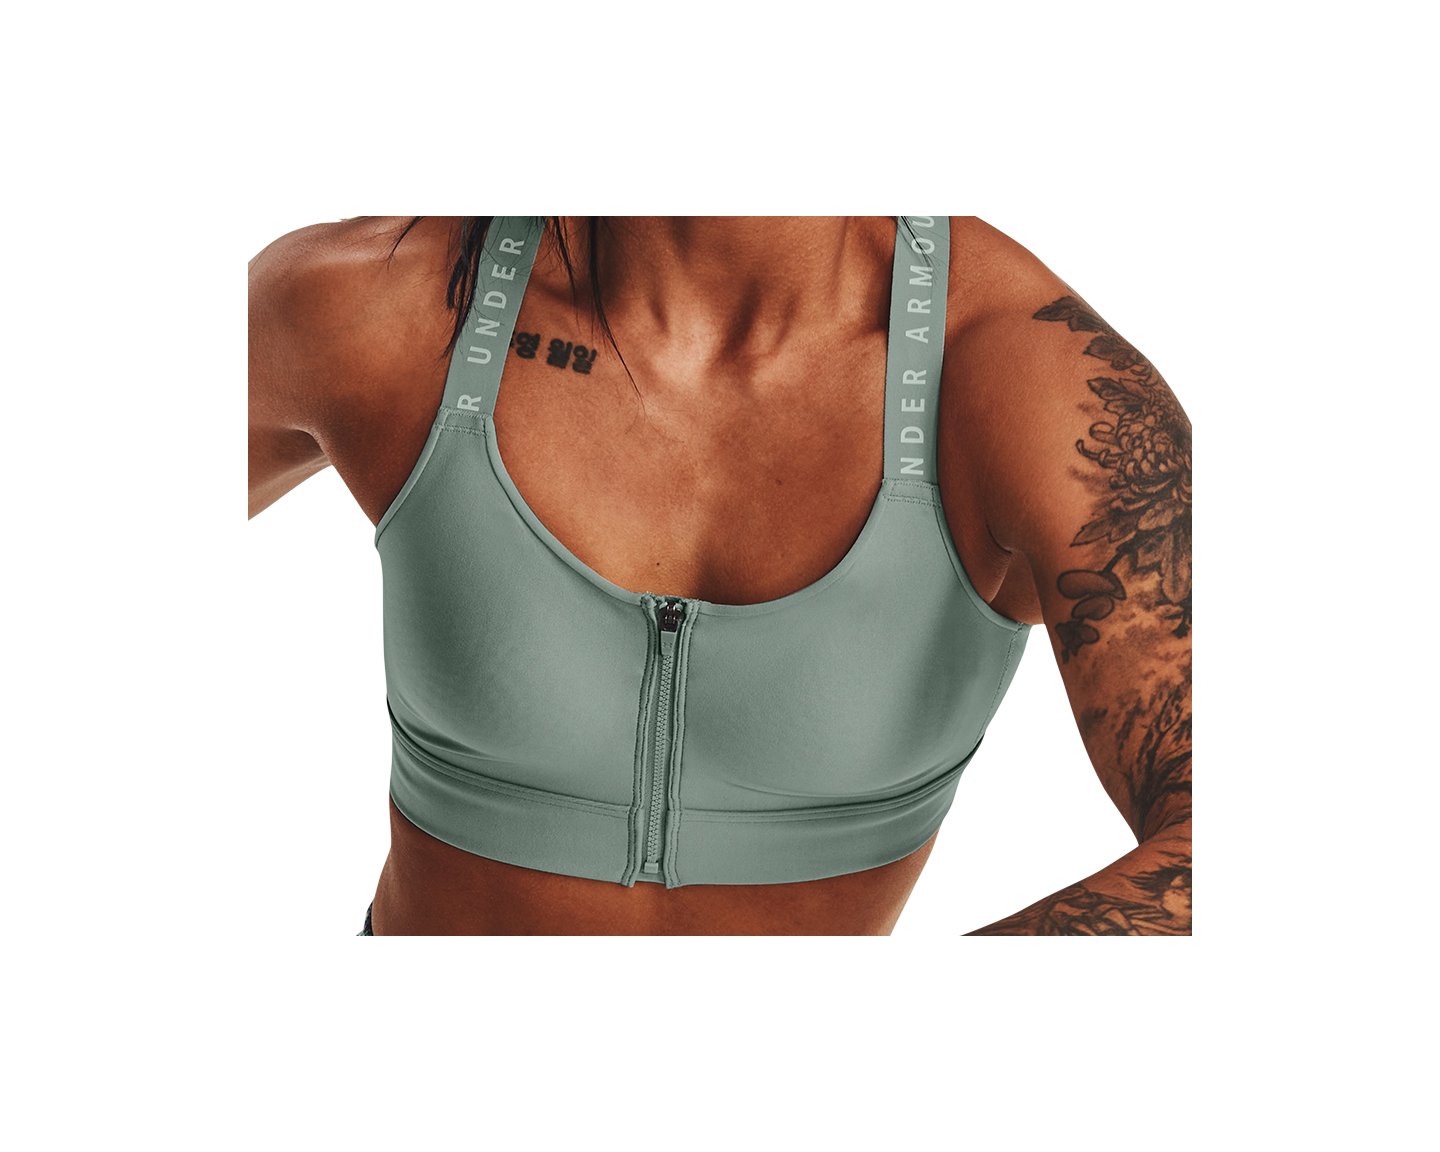 Under Armour Reflect High Impact Sports Bra Sz XS MSRP $50 Style #1321896